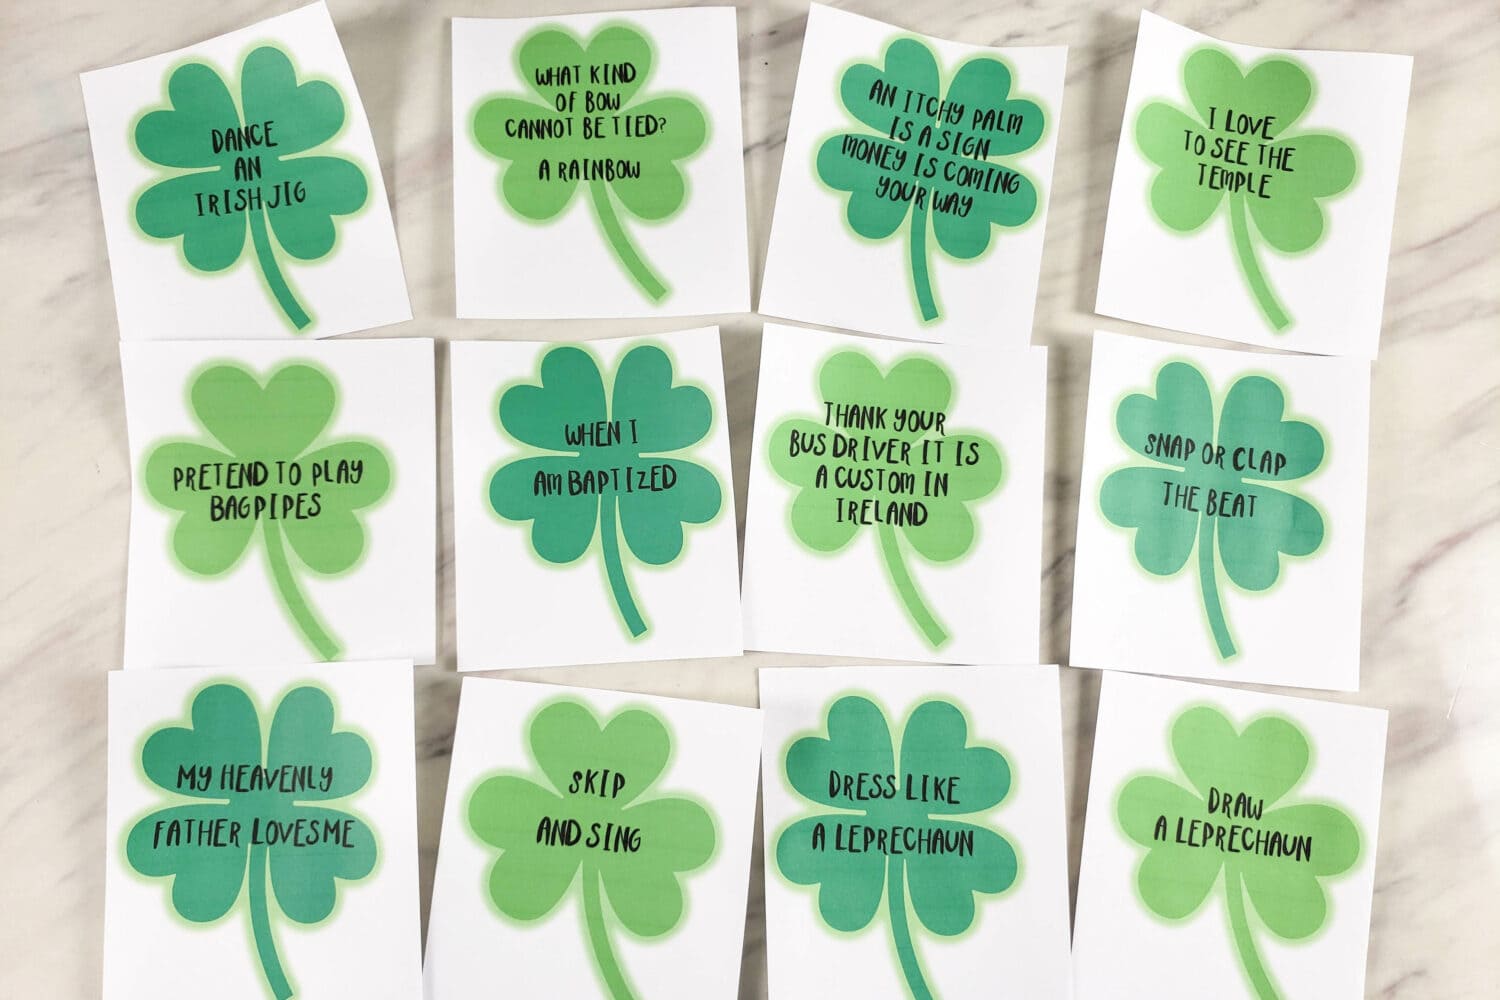 St Patrick's Day Hidden Clovers Singing Time Game with jokes, dares, Primary songs, Irish facts, and more!